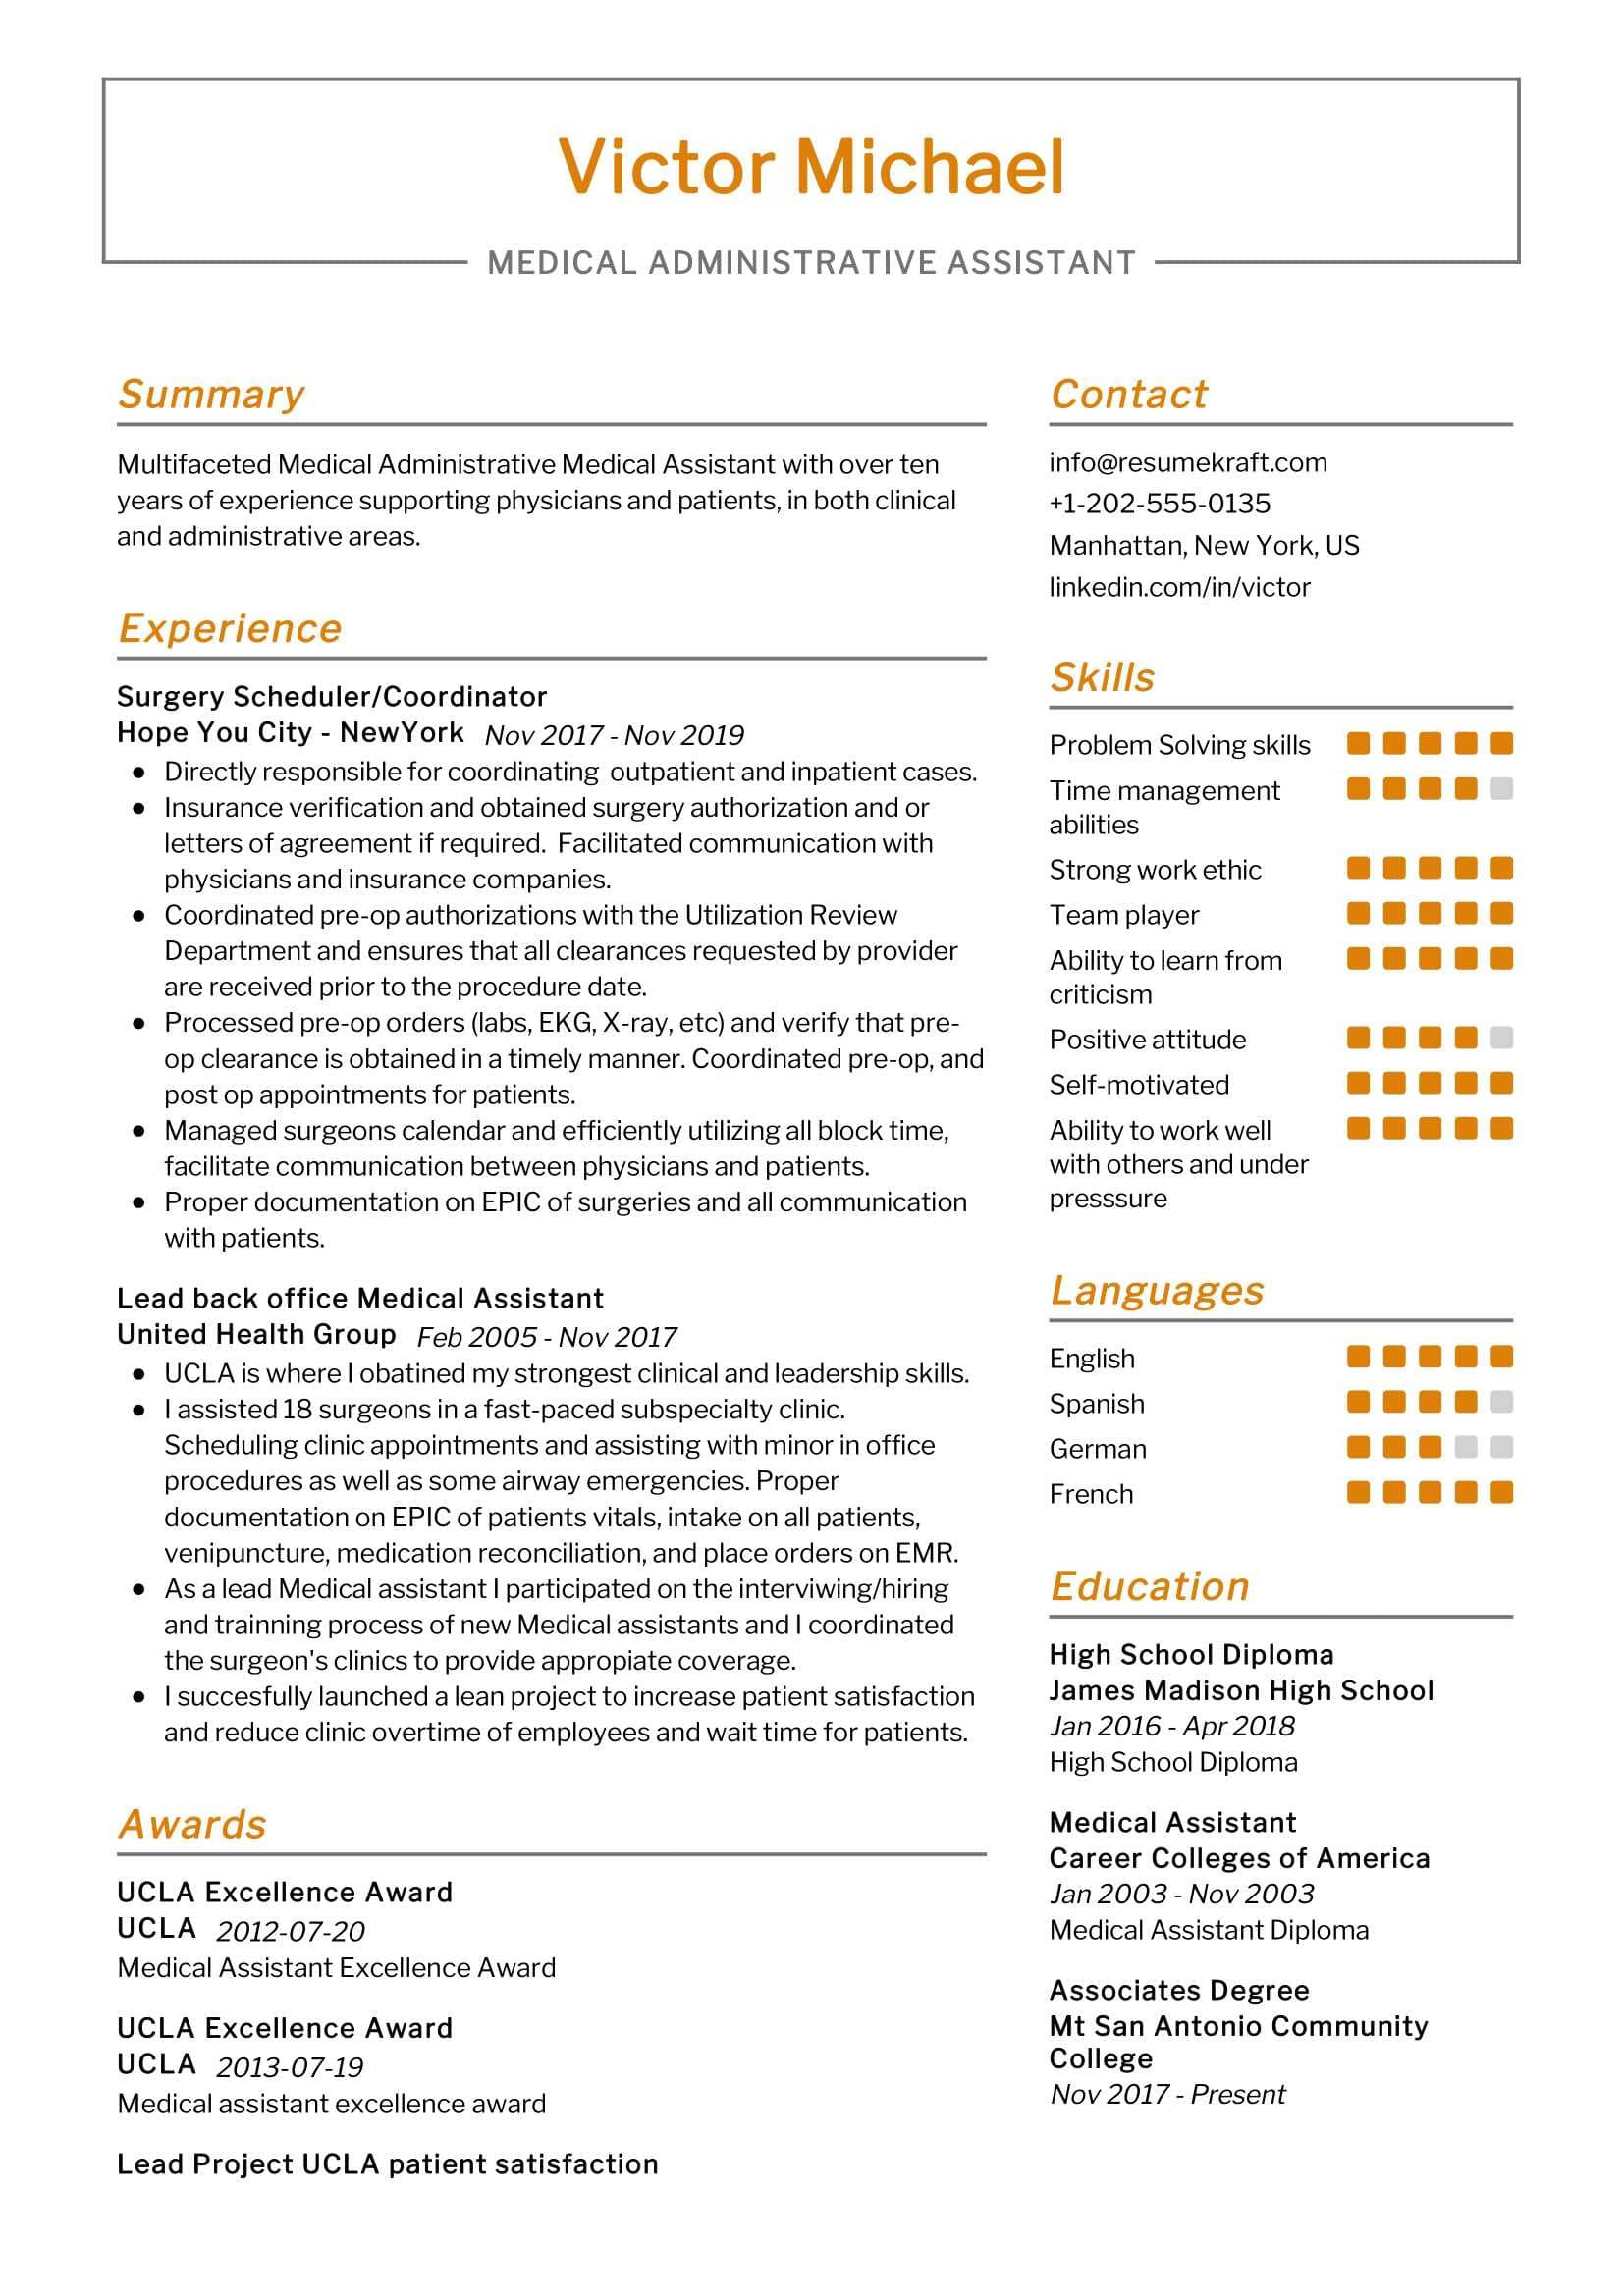 Resume for Medical assistant Profesional Skills Sample Medical Administrative assistant Resume Sample 2022 Writing Tips …